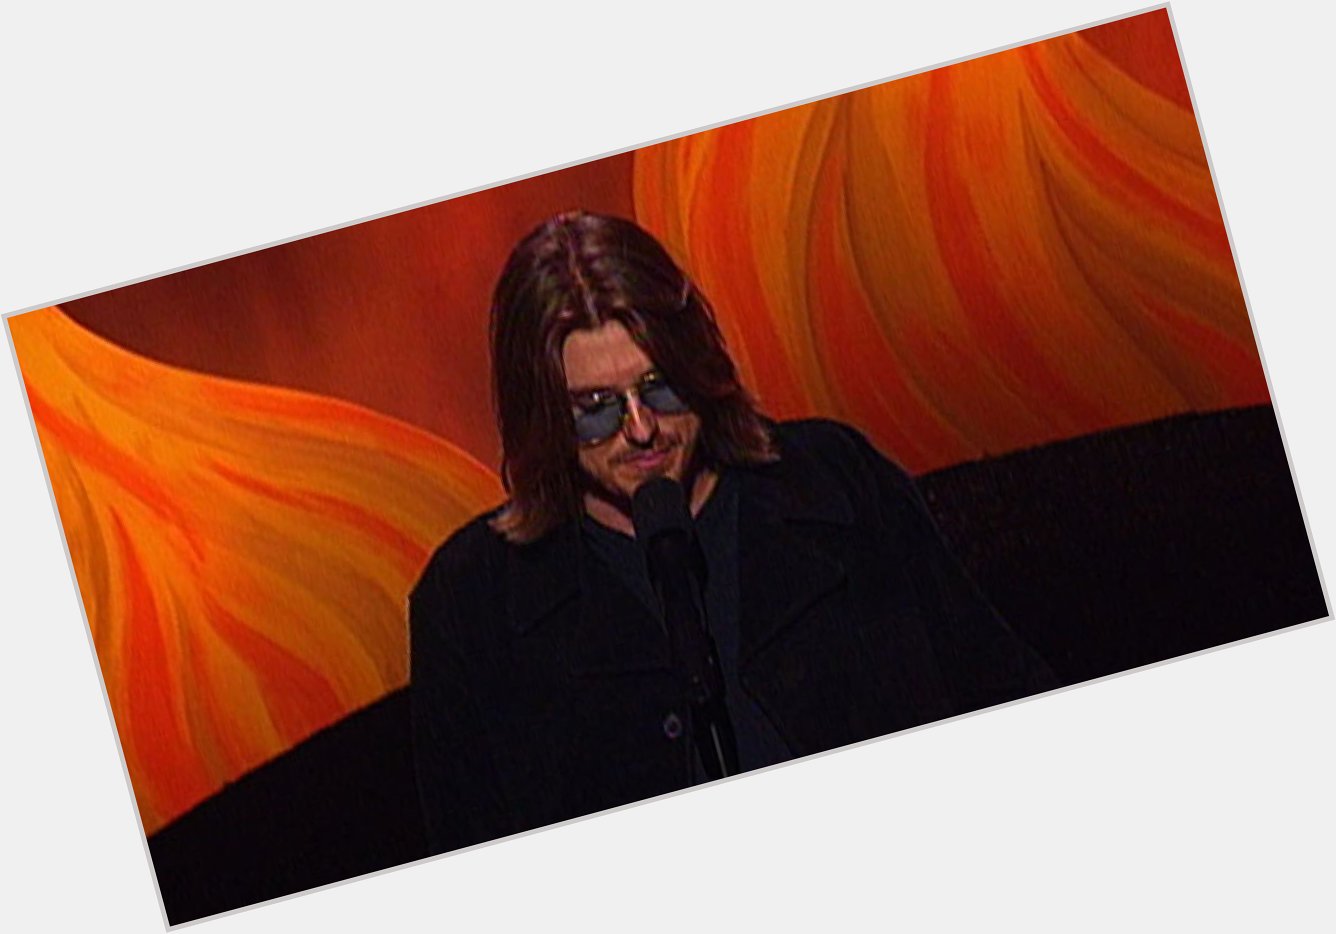 Happy Birthday to Mitch Hedberg, who would have turned 49 today! 